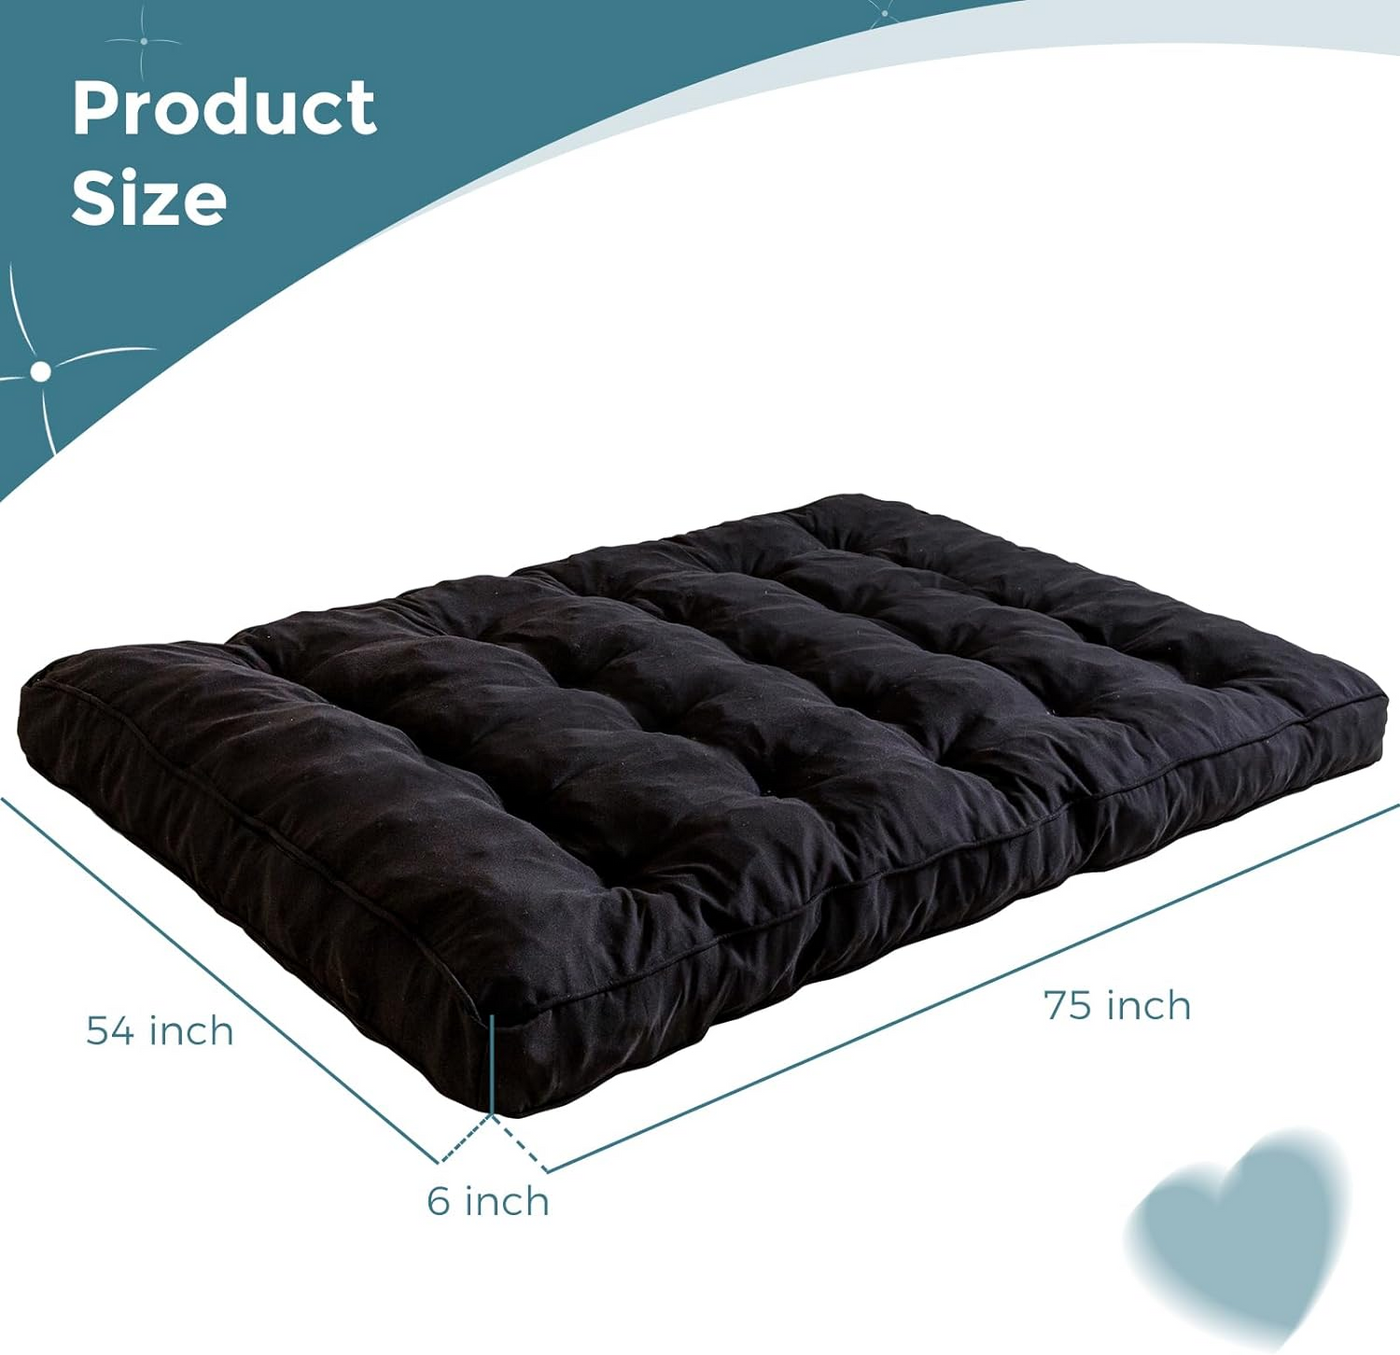 MAXYOYO 6" Futon Mattress, Thick Futons Sofa Couch Bed, Shredded Foam Filling, Medium Firm(Frame Not Included), Black